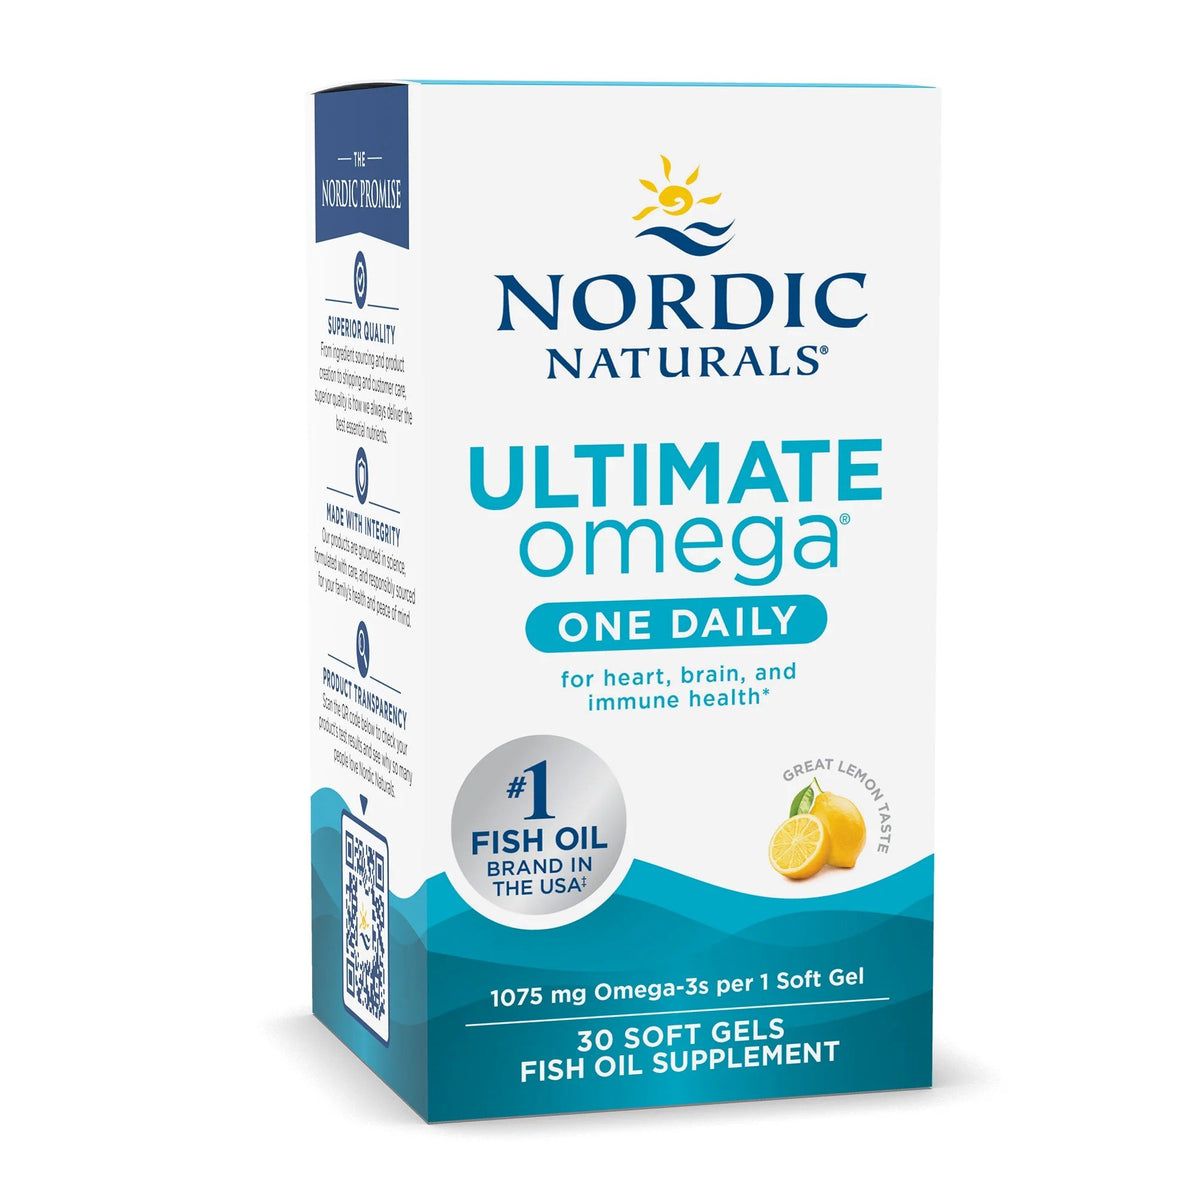 Nordic Naturals Ultimate Omega One Daily 30 Softgel